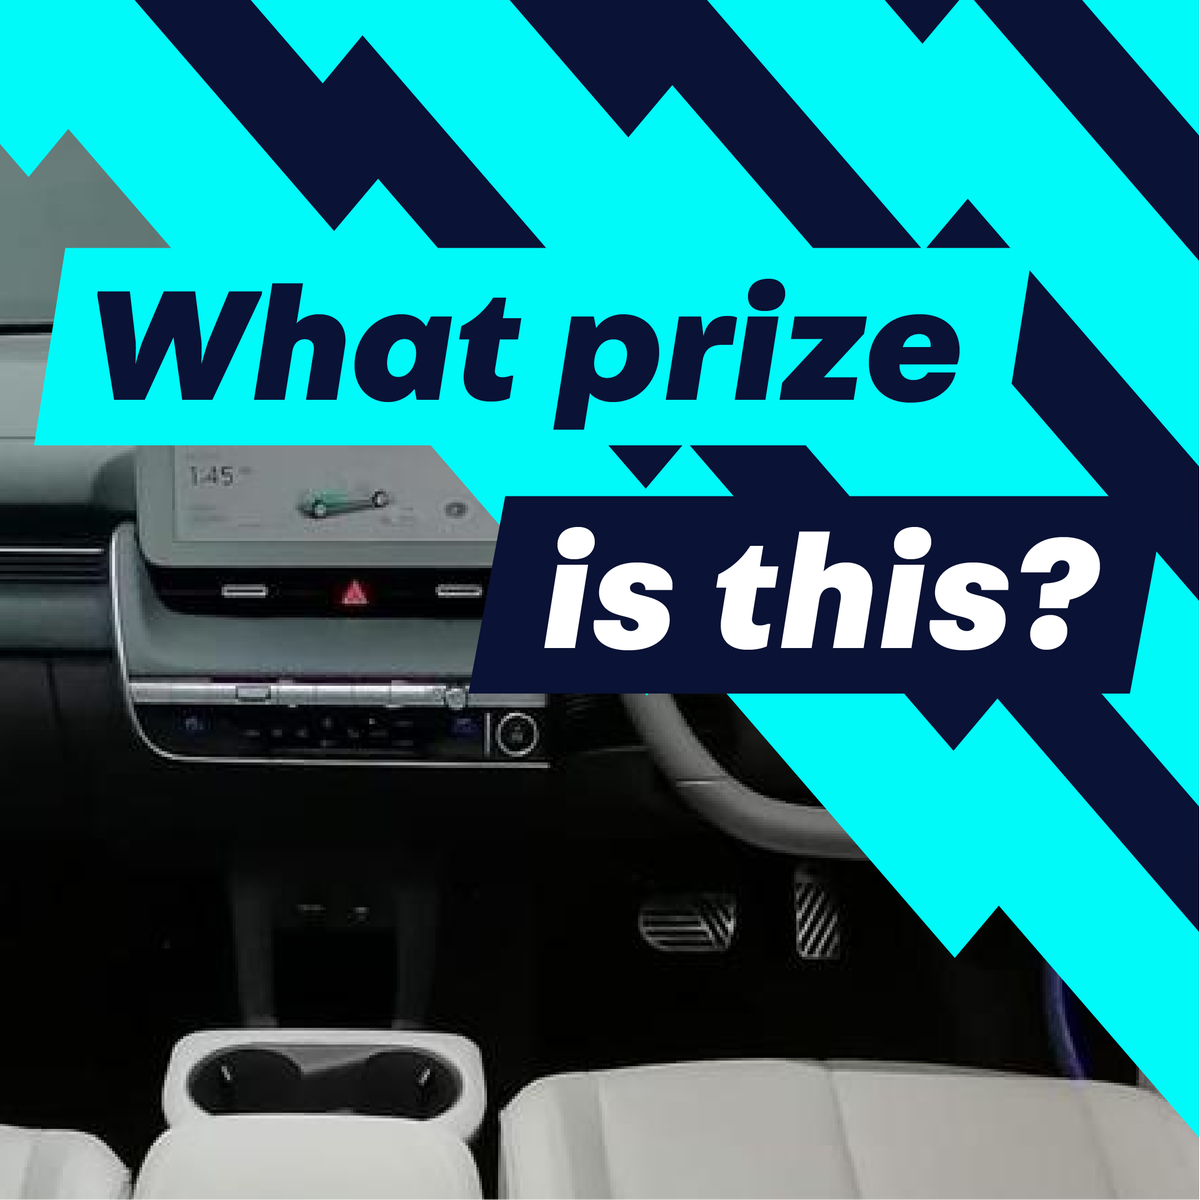 🔎 SNEAK PEEK ALERT 🔎 It's nearly 1st June which means the announcement of June’s electric vehicle giveaway prize. However, in June we are giving away TWO prizes to one lucky winner! Can you guess what they are? 🤔👇